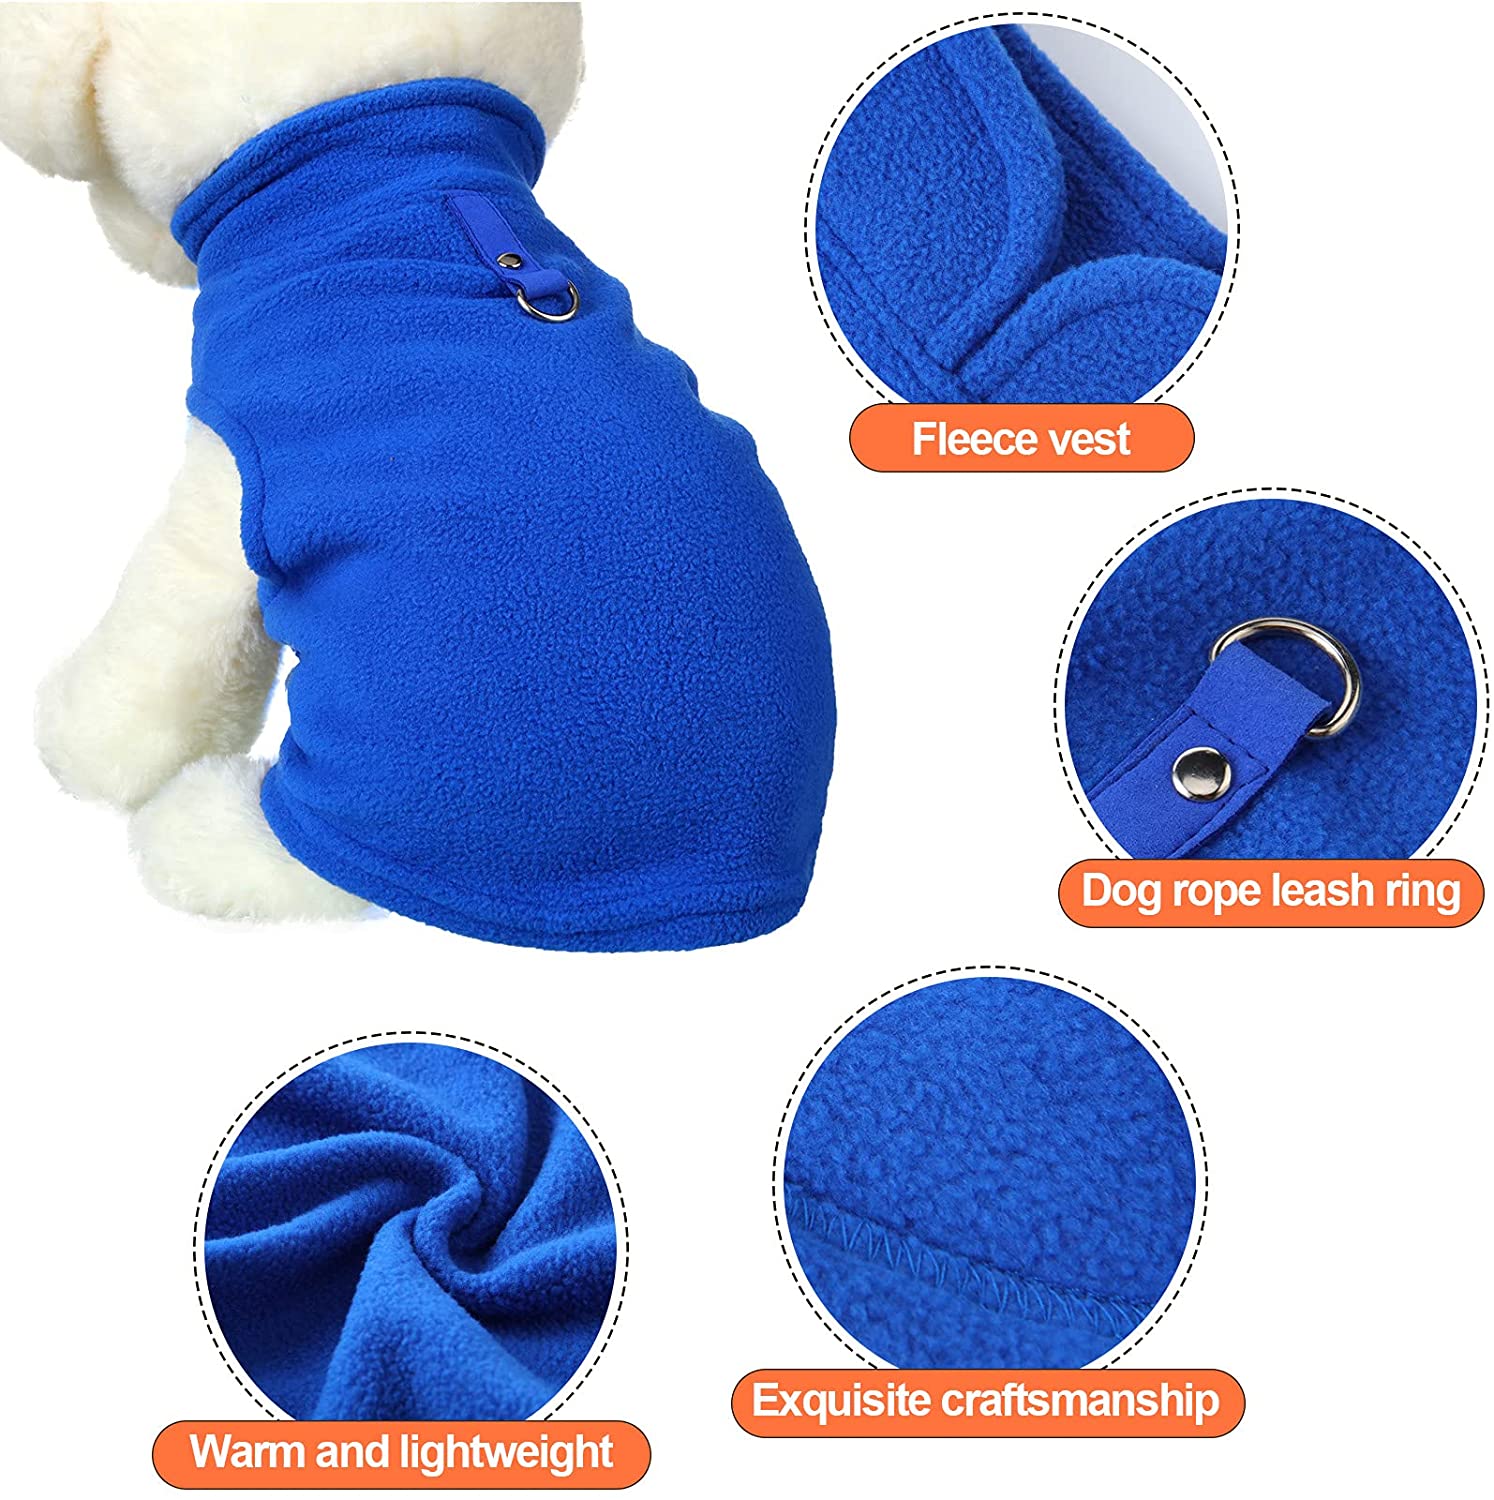 KUTKUT Fleece Vest Dog Sweater - Warm Pullover Fleece Dog Jacket with Leash Attachment - Winter Small Dog Sweater Coat - Cold Weather Dog Clothes for Small Dogs ShishTzu, Lahsa Apso, King Cha